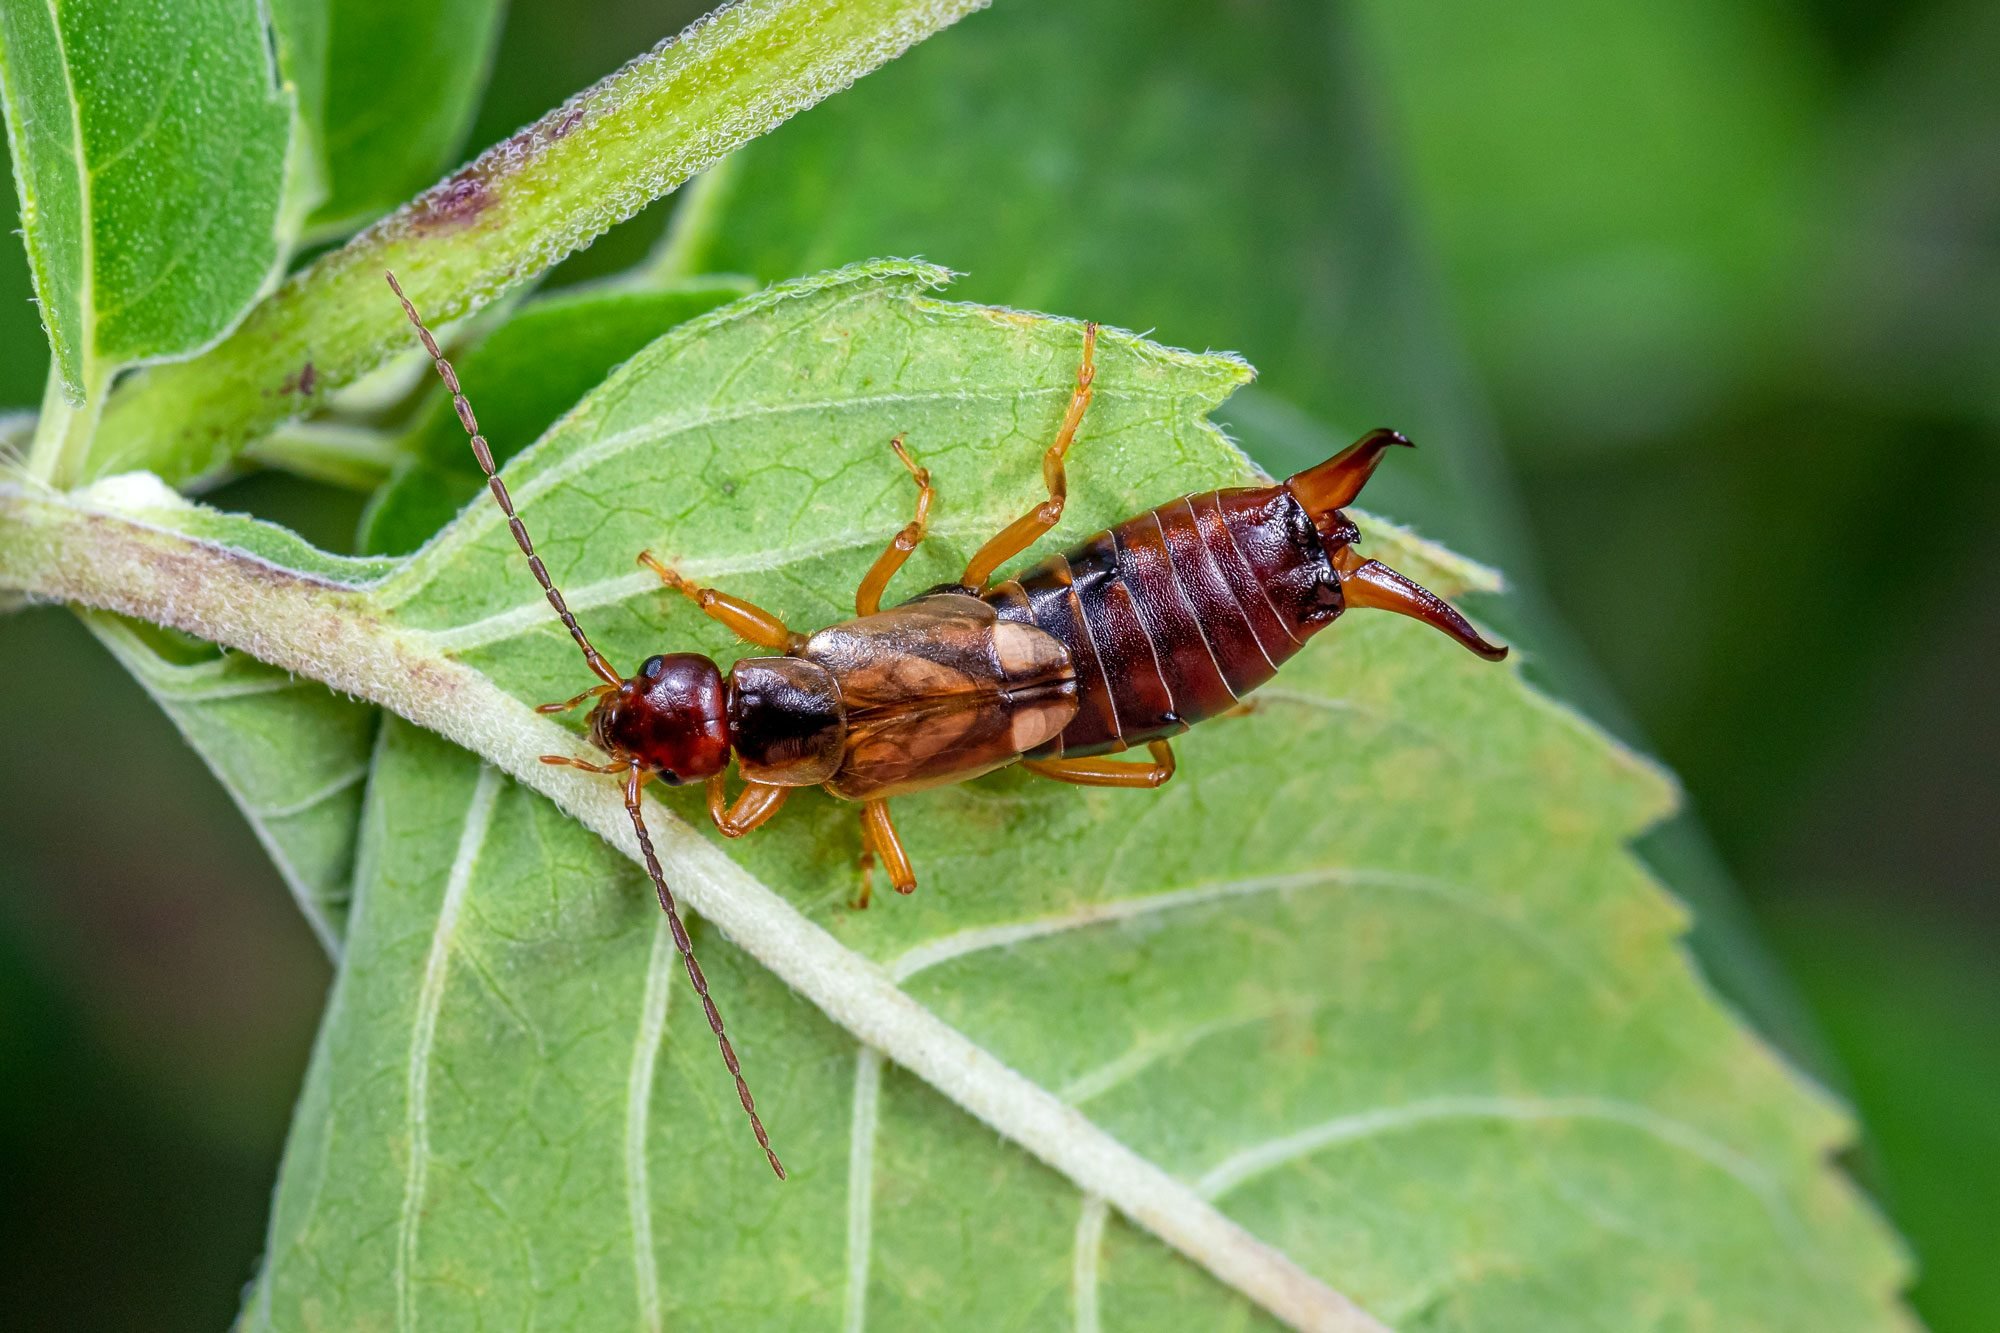 How To Get Rid of Earwigs in the Home and Yard